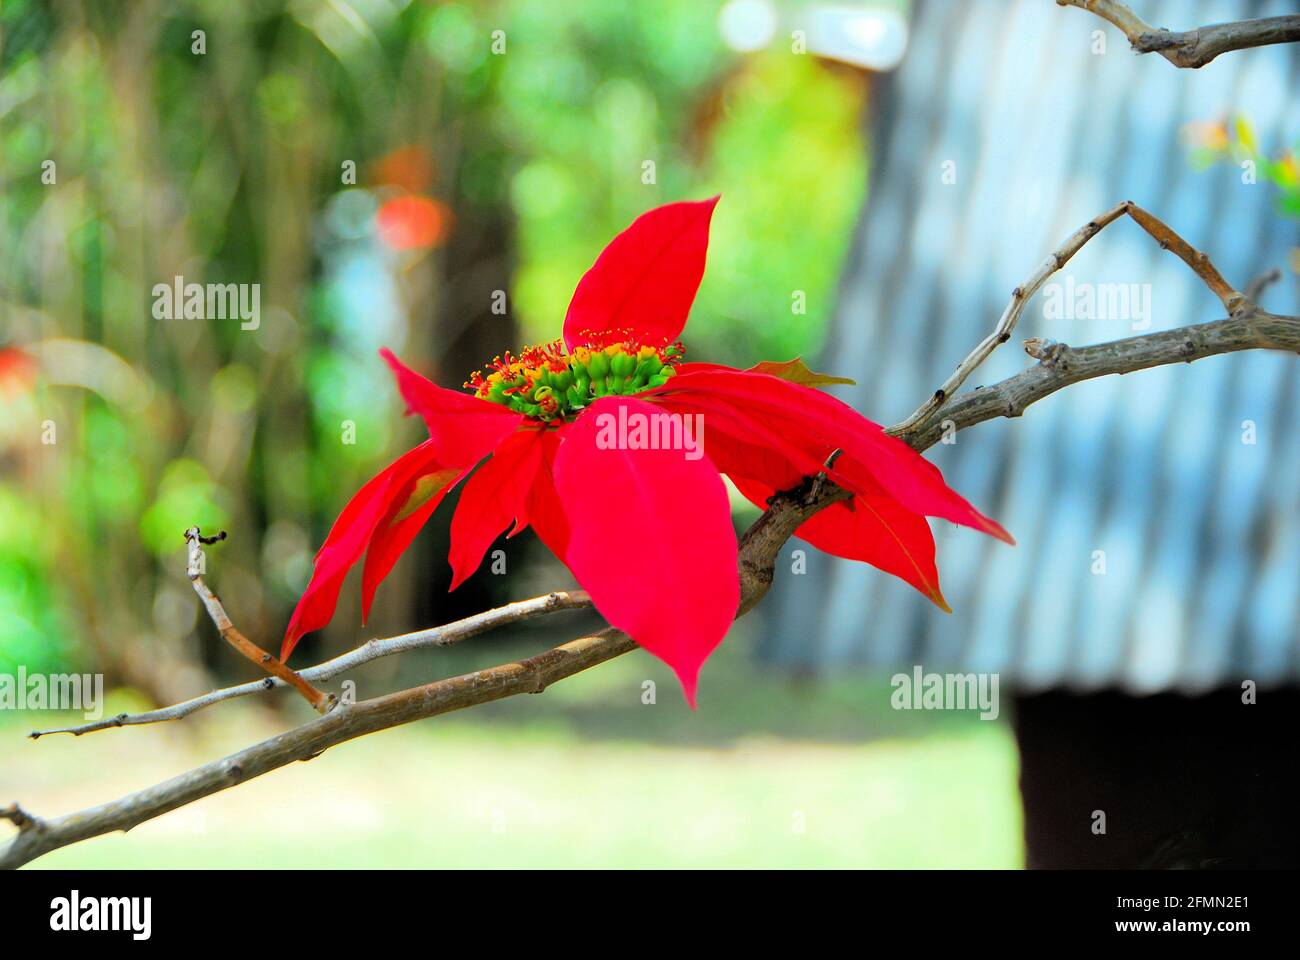 A beautiful red poinsettia growing on a branch in Ethiopia, East Africa, Stock Photo